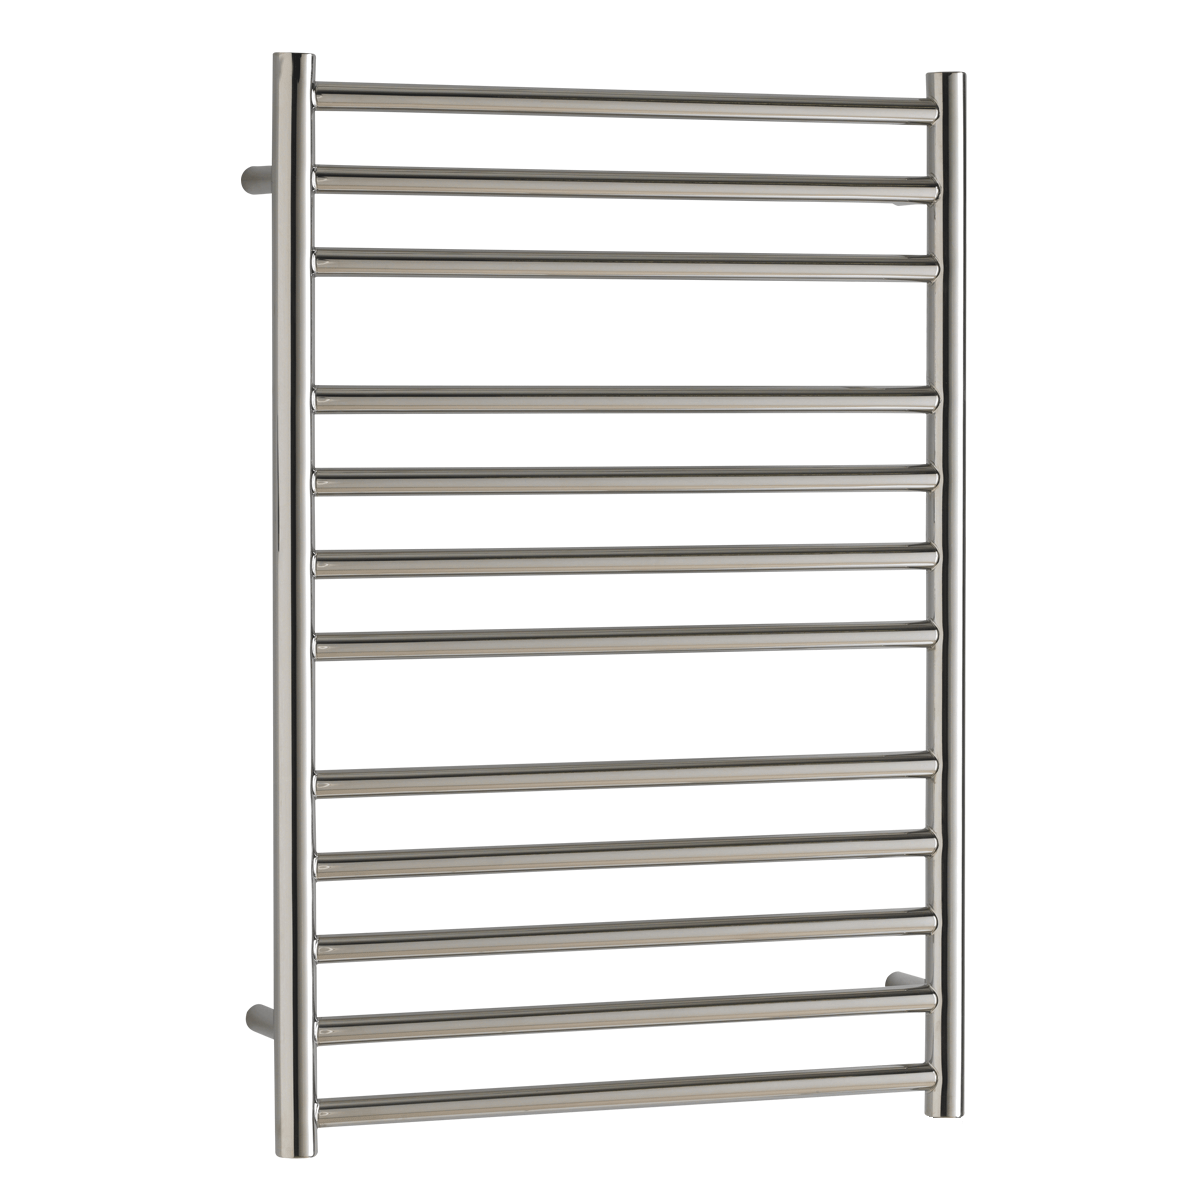 Aura Steel Stainless Steel Smart Electric Towel Rail with Thermostat, Timer + WiFi Control